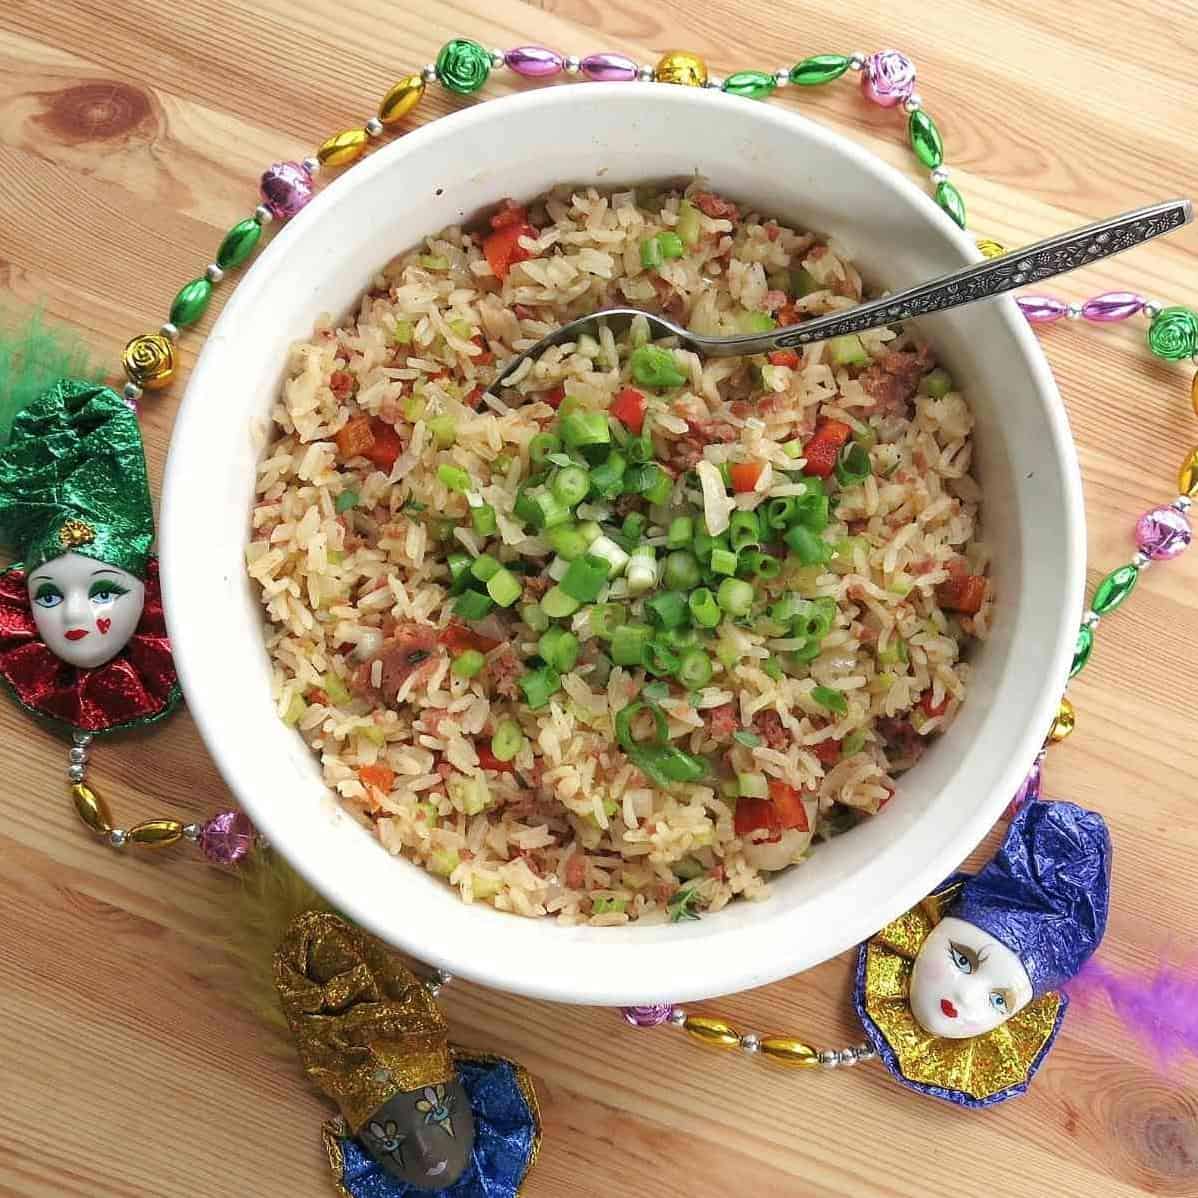  Let the good times roll with this delicious and easy-to-make Mardi Gras Rice Salad.